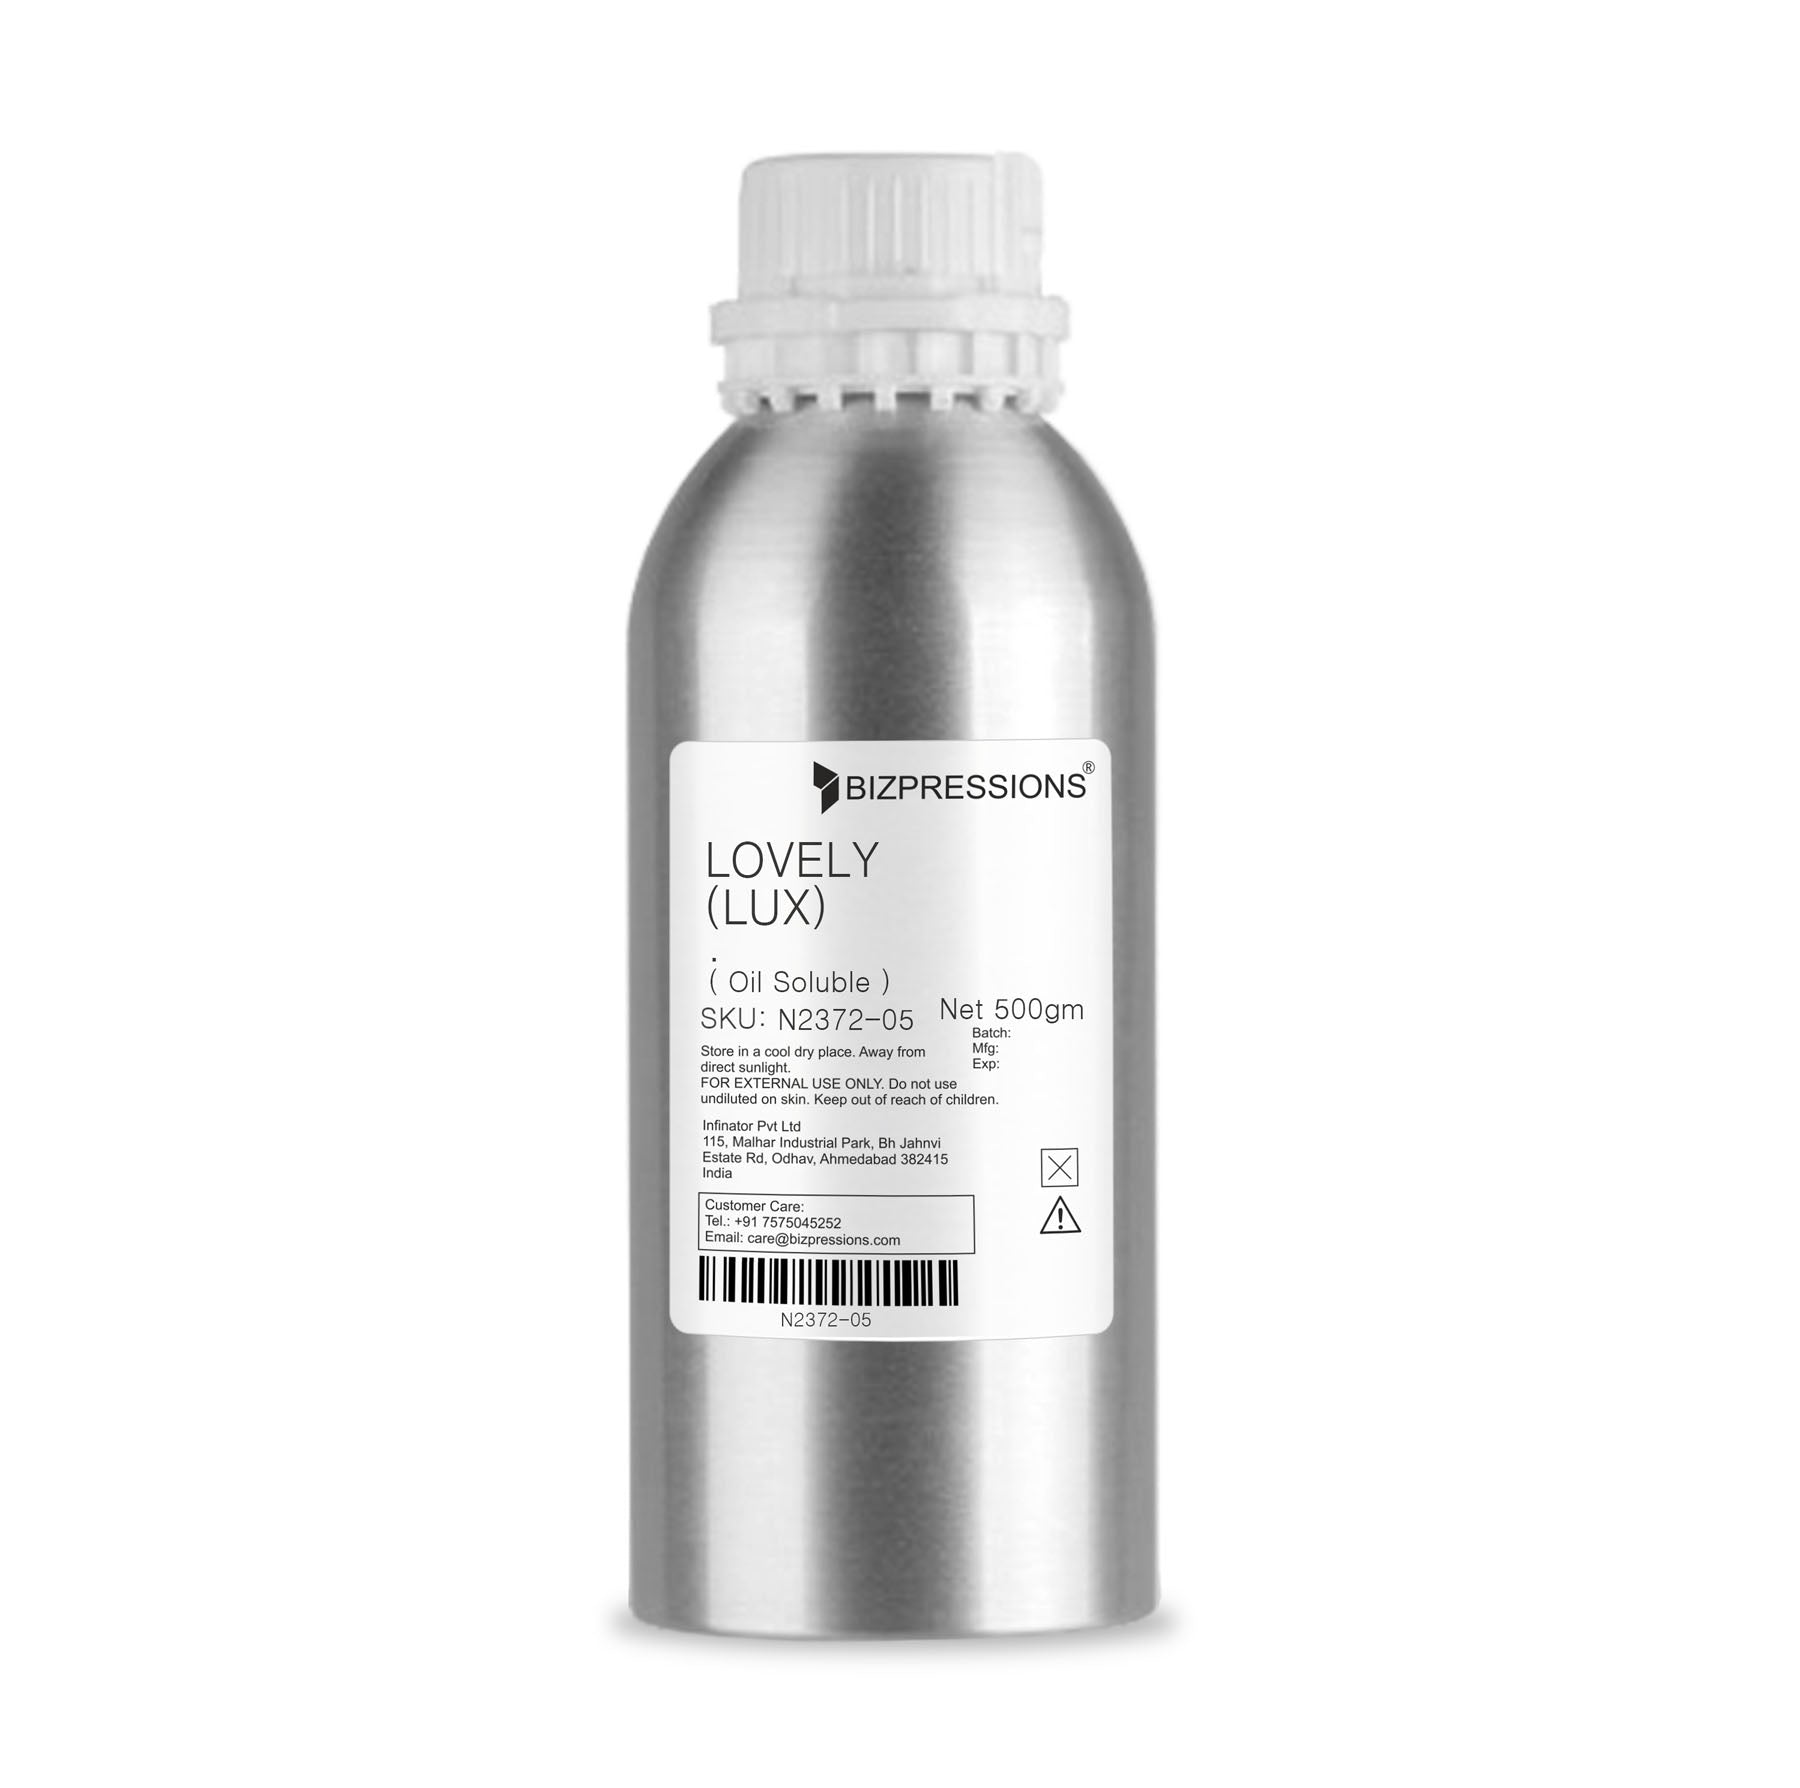 LOVELY (LUX) - Fragrance ( Oil Soluble ) - 500 gm